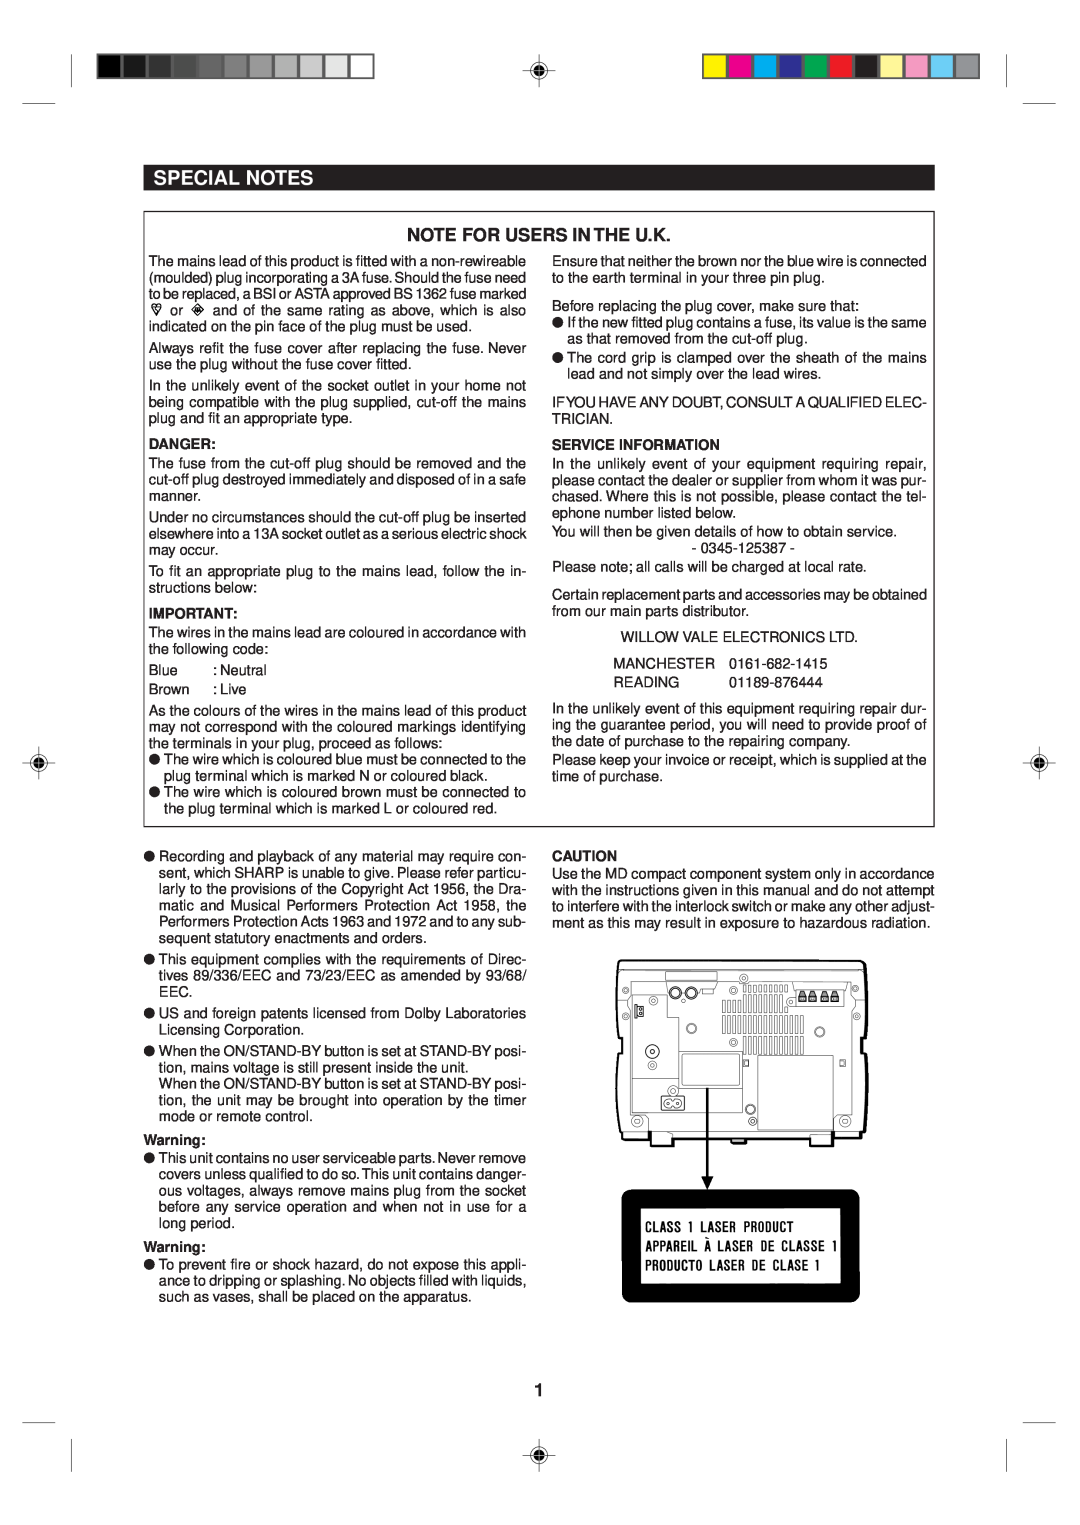 Sharp MD-MX10H operation manual Special Notes, Note For Users In The U.K 